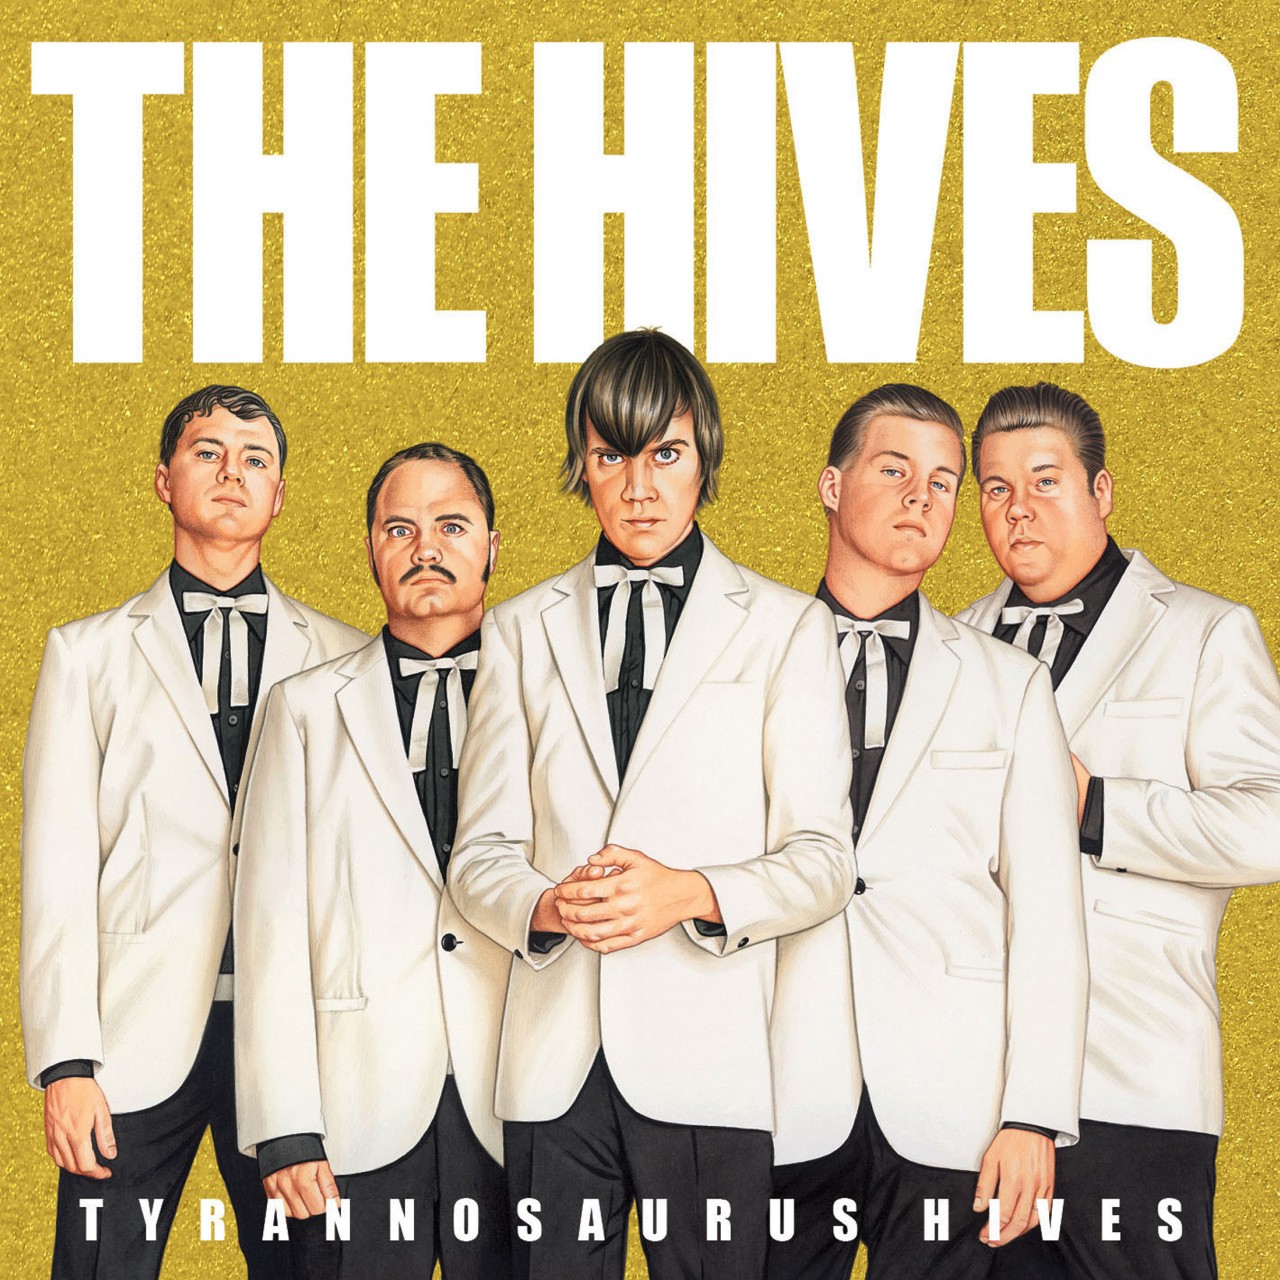 The Hives, Tyrannosaurus Hives CD cover, poster